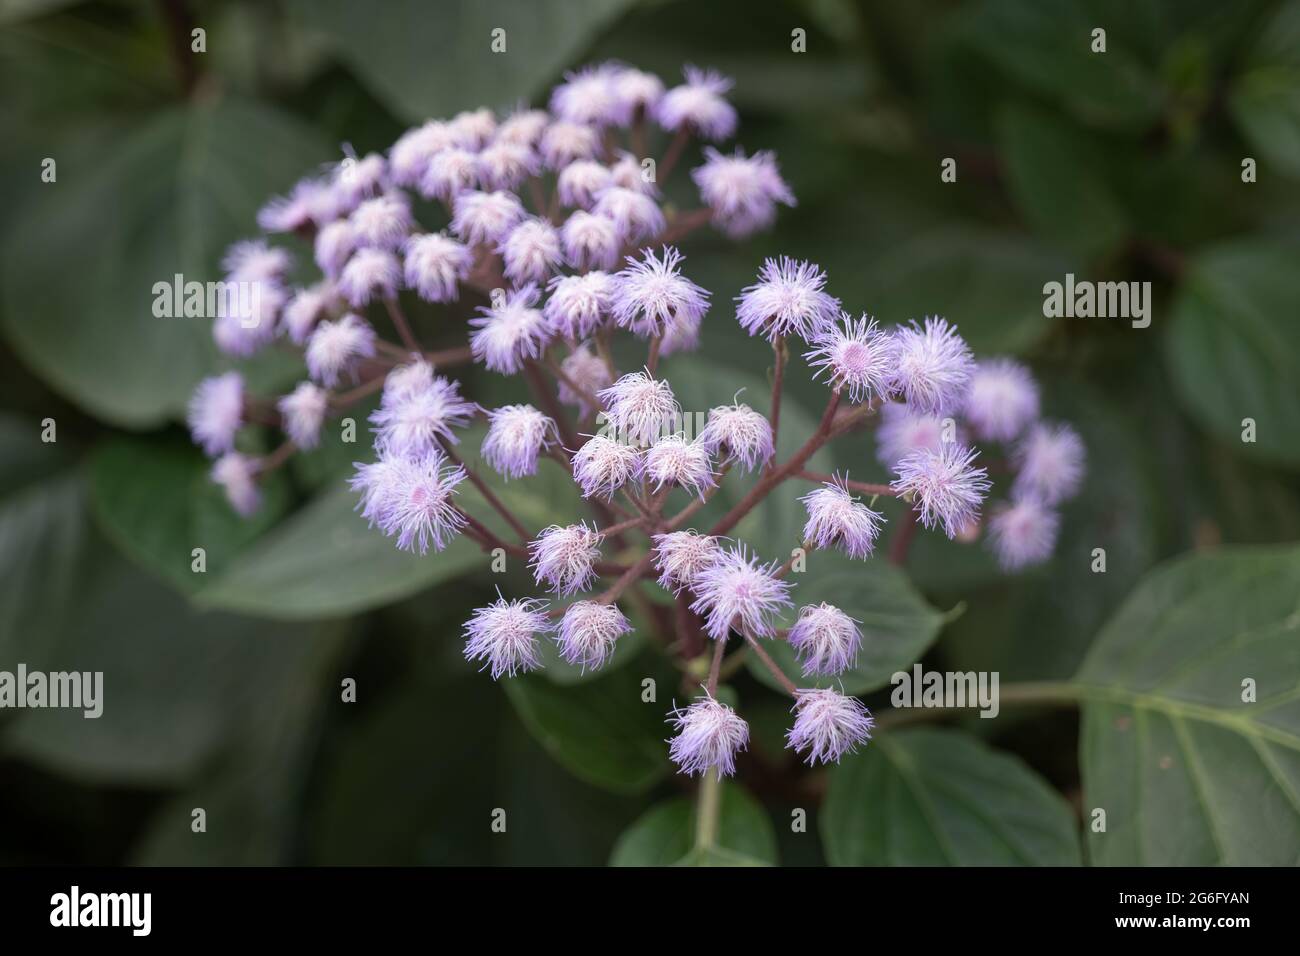 Bartlettina sordida, Purple Torch or Blue Mist Flower, family: Asteraceae, region: endemic to cloud forest in Mexico Stock Photo